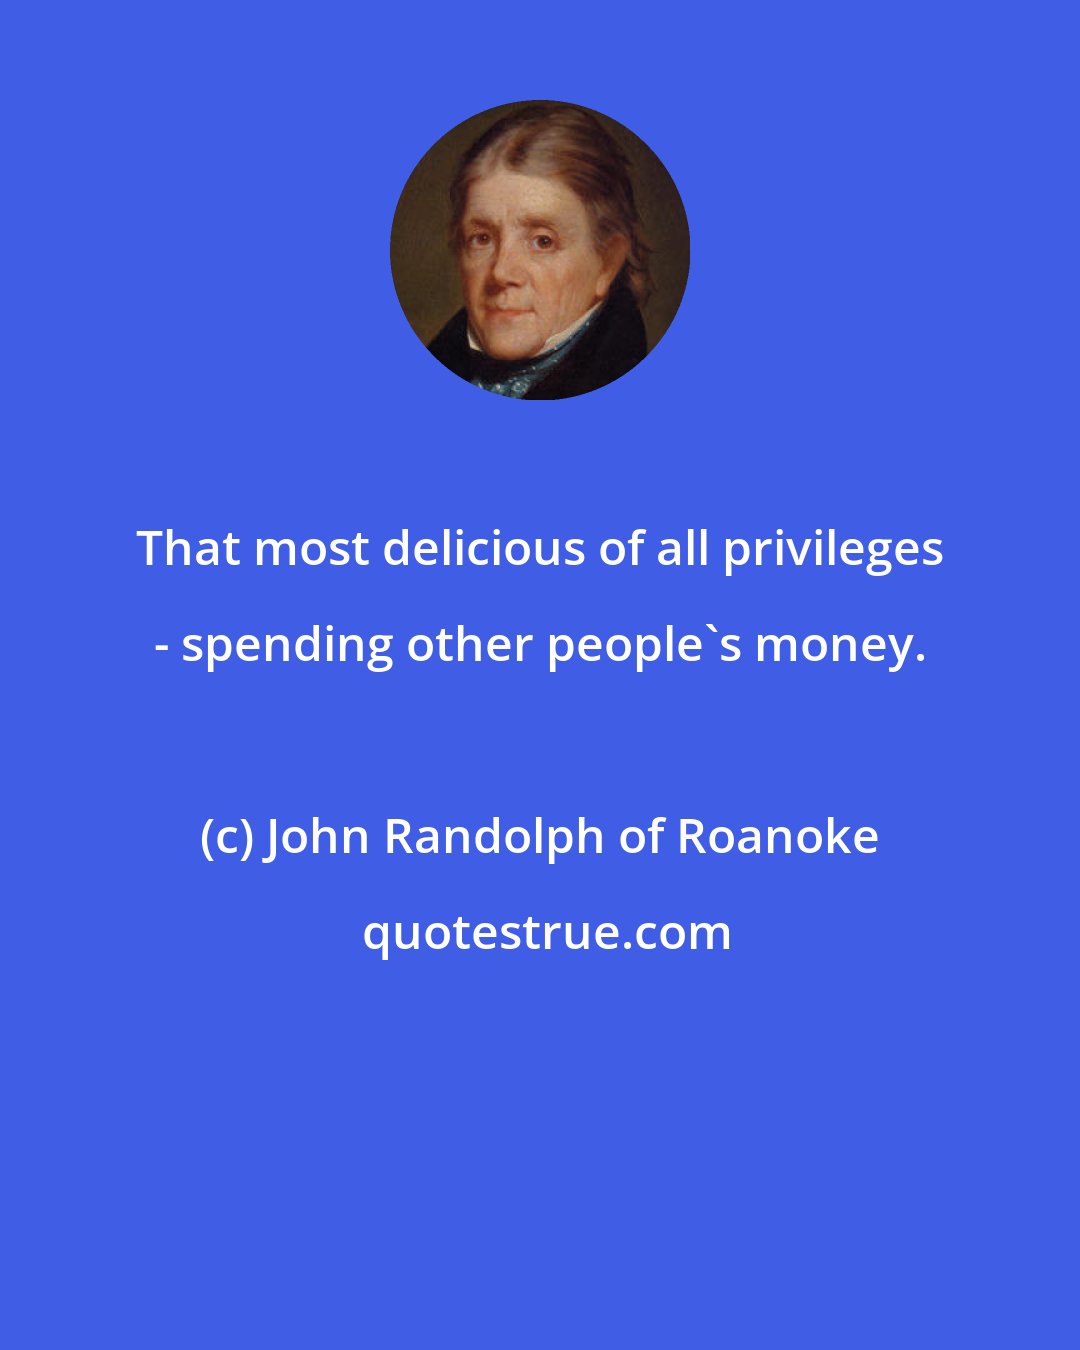 John Randolph of Roanoke: That most delicious of all privileges - spending other people's money.